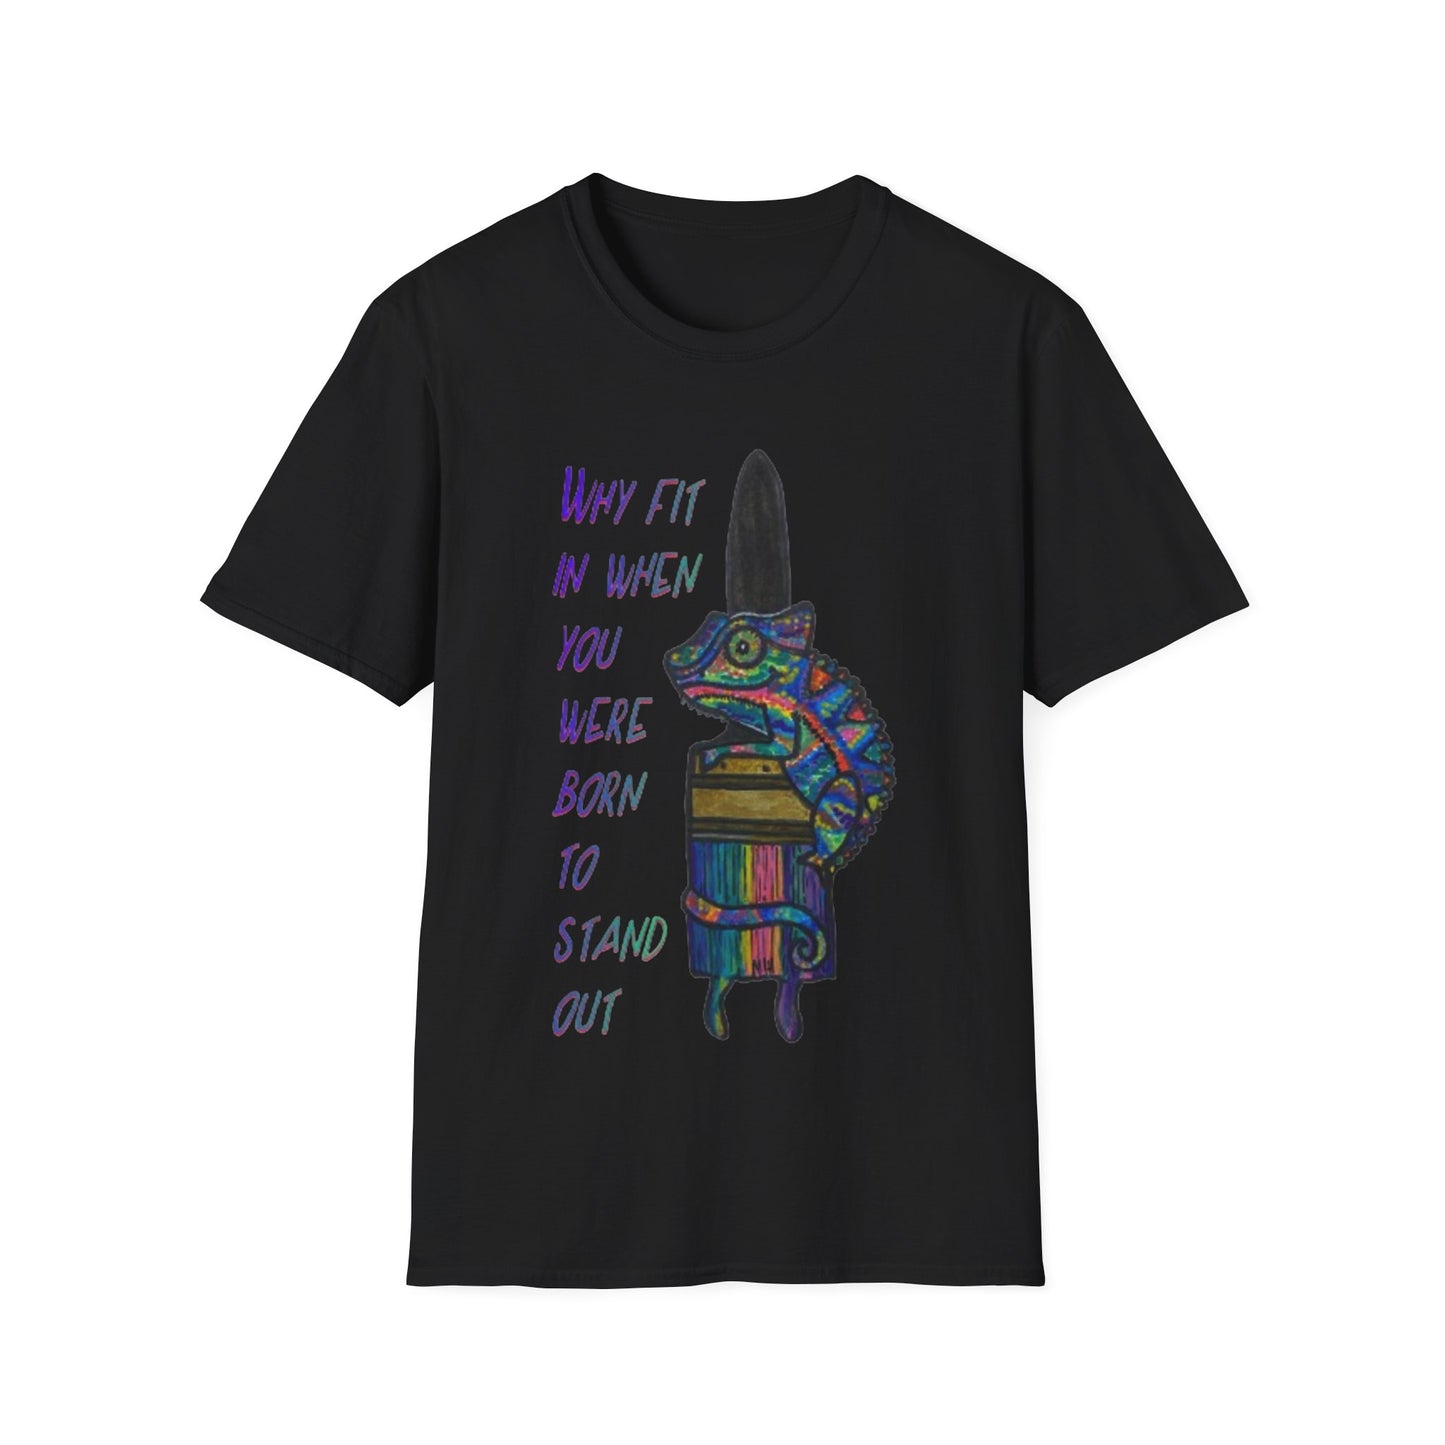 Why fit in when you were born to stand out - Unisex Softstyle T-Shirt